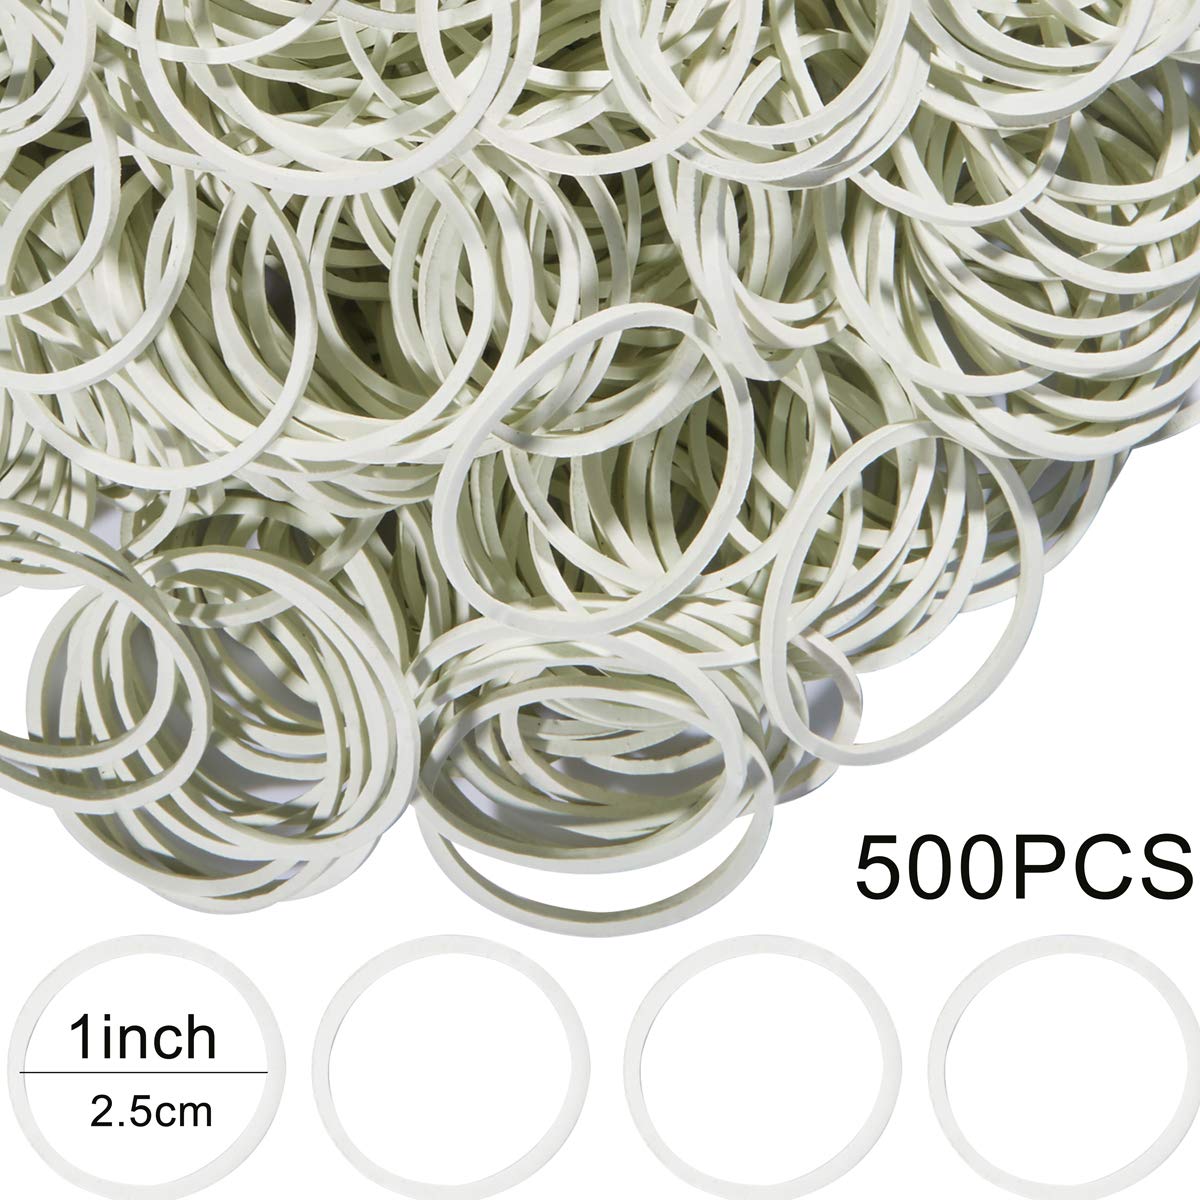 AMUU Rubber Bands 500pcs Red 2.5cm 1inch Small mini Rubber Bands for Office  School Home Elastic Band